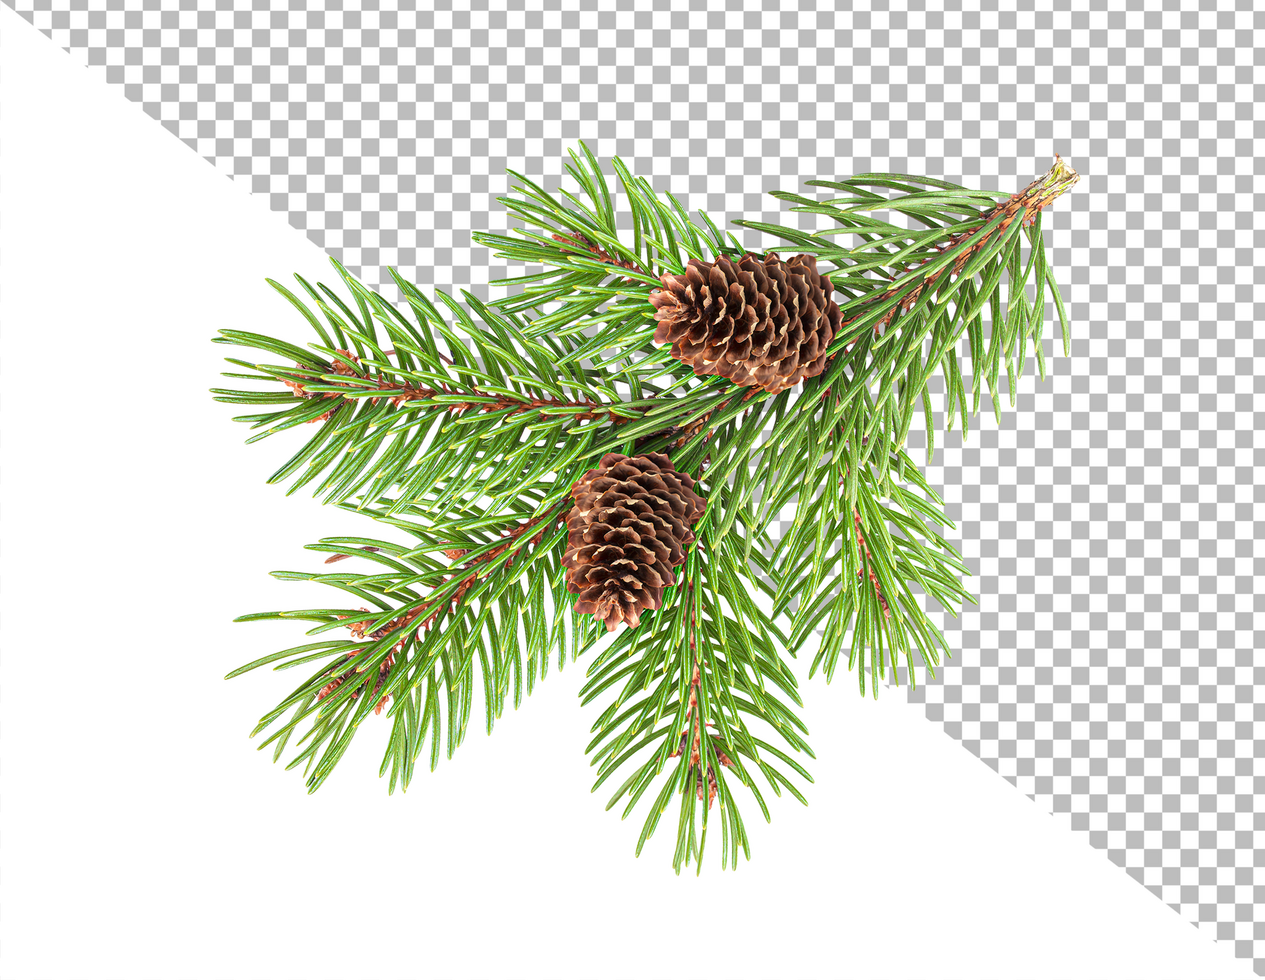 Fir tree branch with cones isolated on white background with clipping path psd